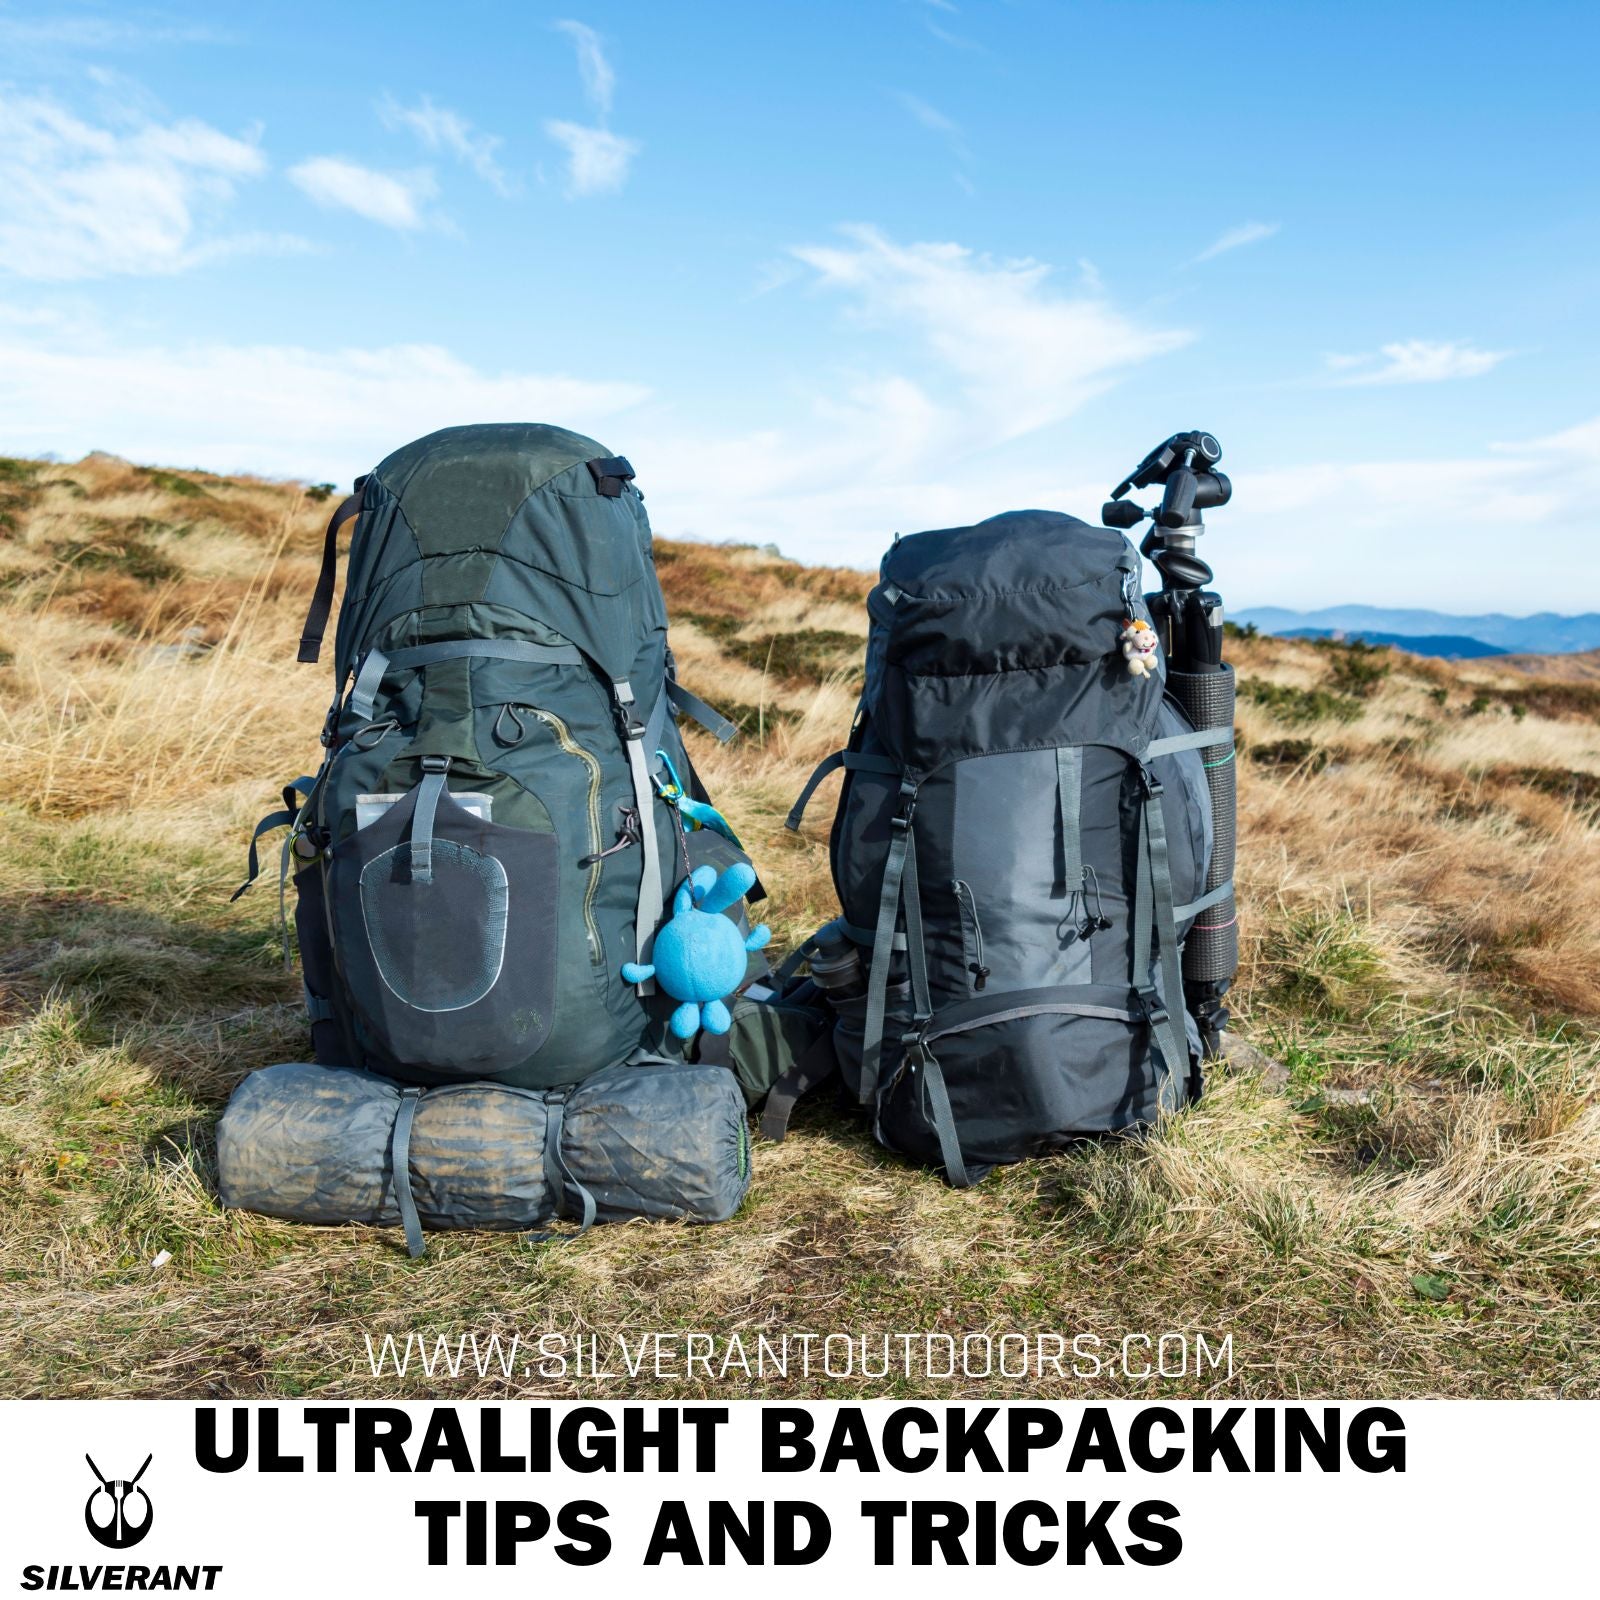 Ultralight Backpacking Tips and Tricks